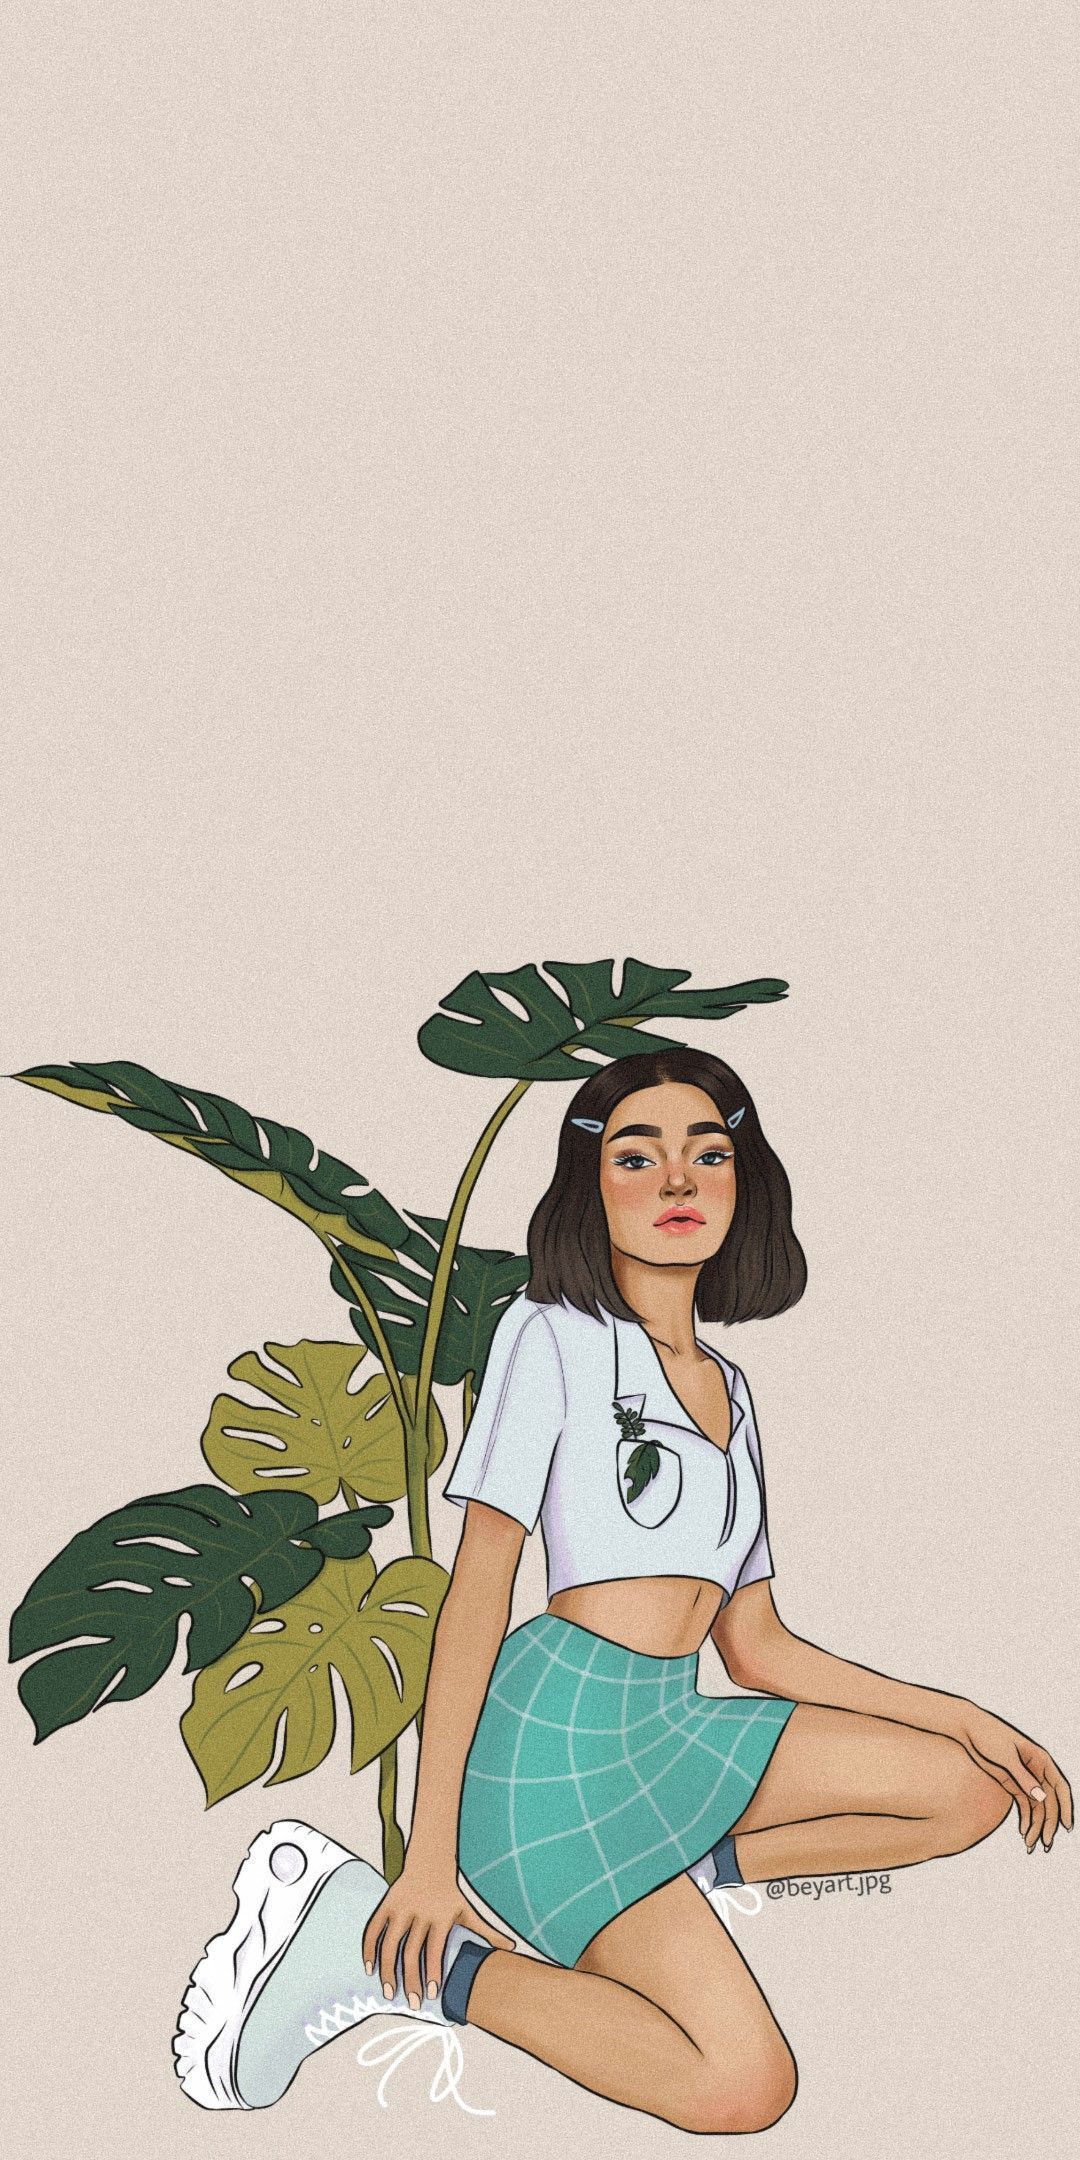 A girl sitting on the ground with plants - Cute